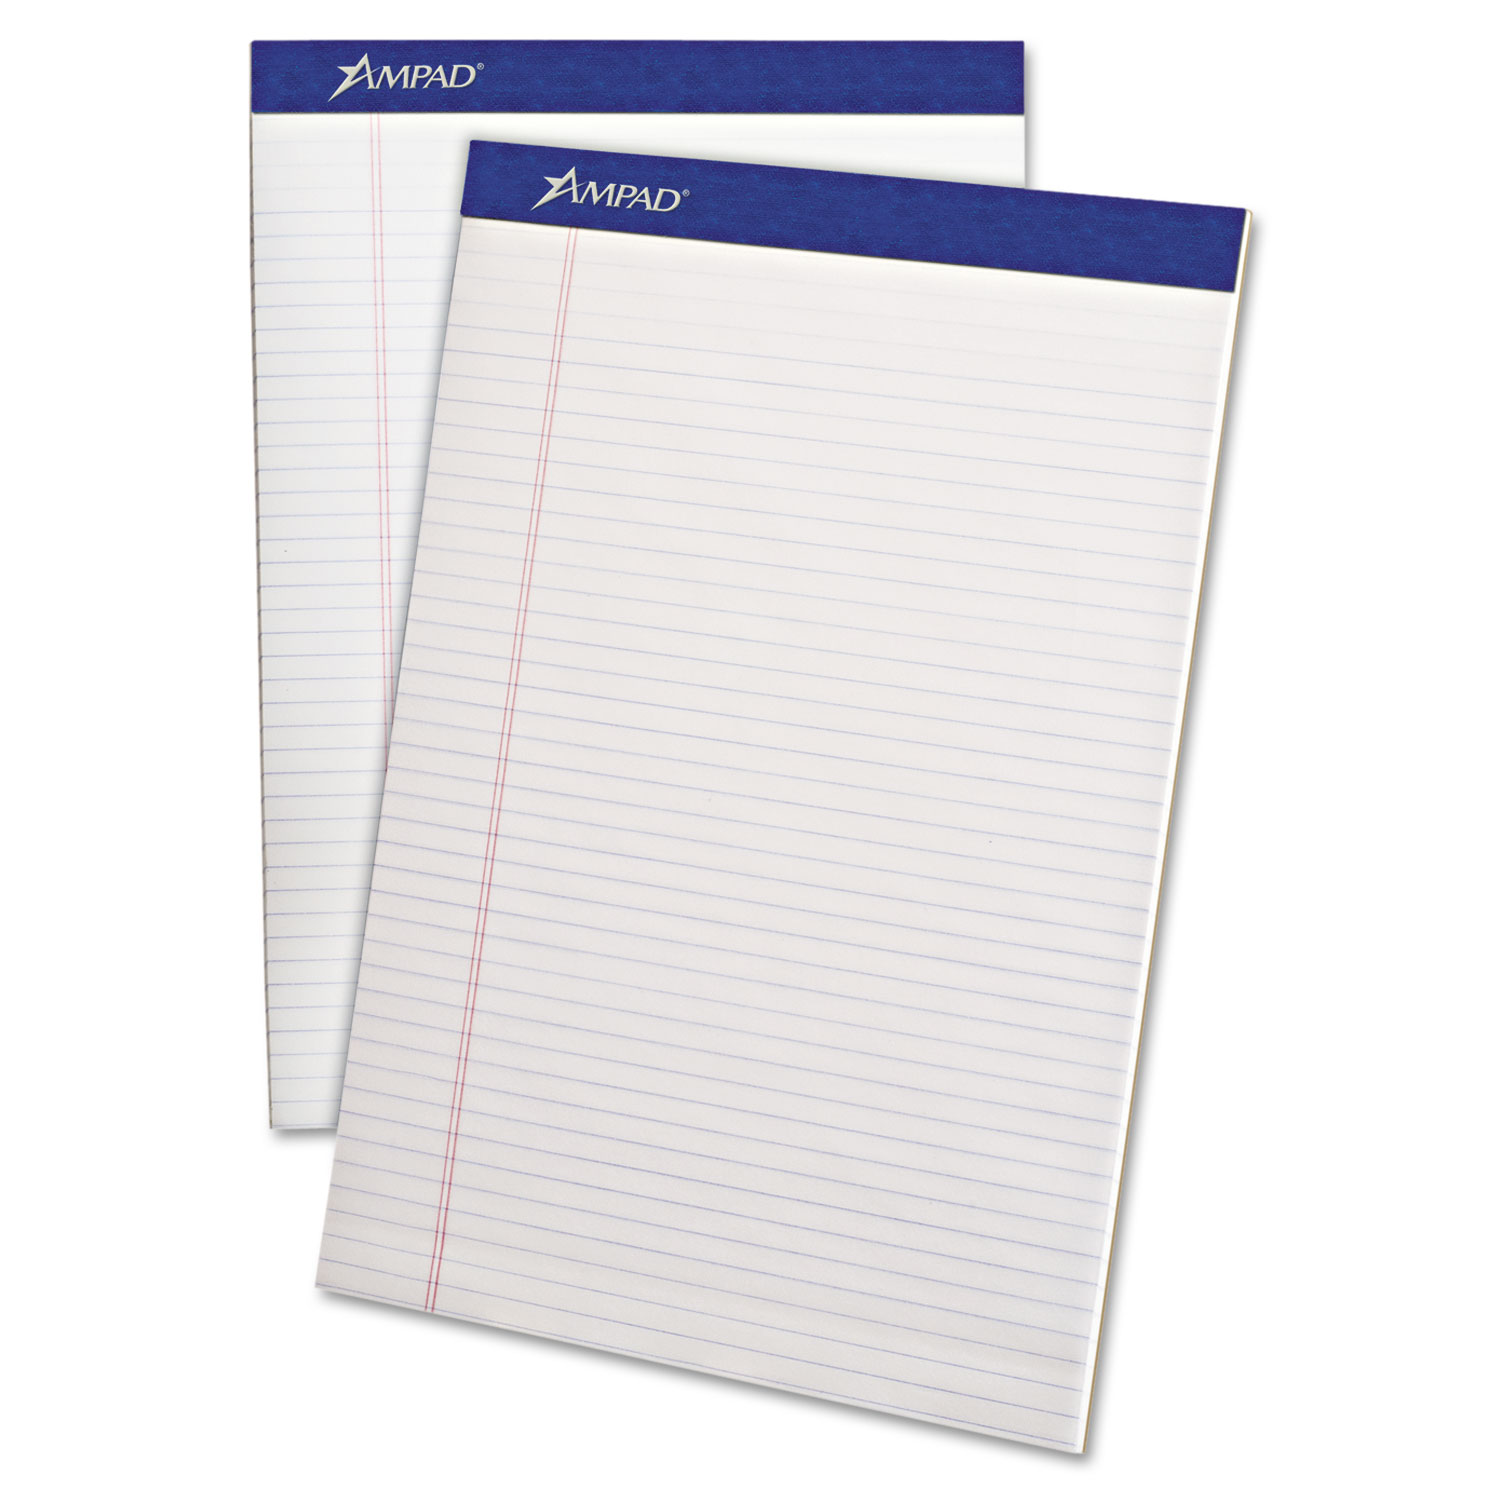  Ampad 20-322 Perforated Writing Pads, Narrow Rule, 8.5 x 11.75, White, 50 Sheets, Dozen (TOP20322) 